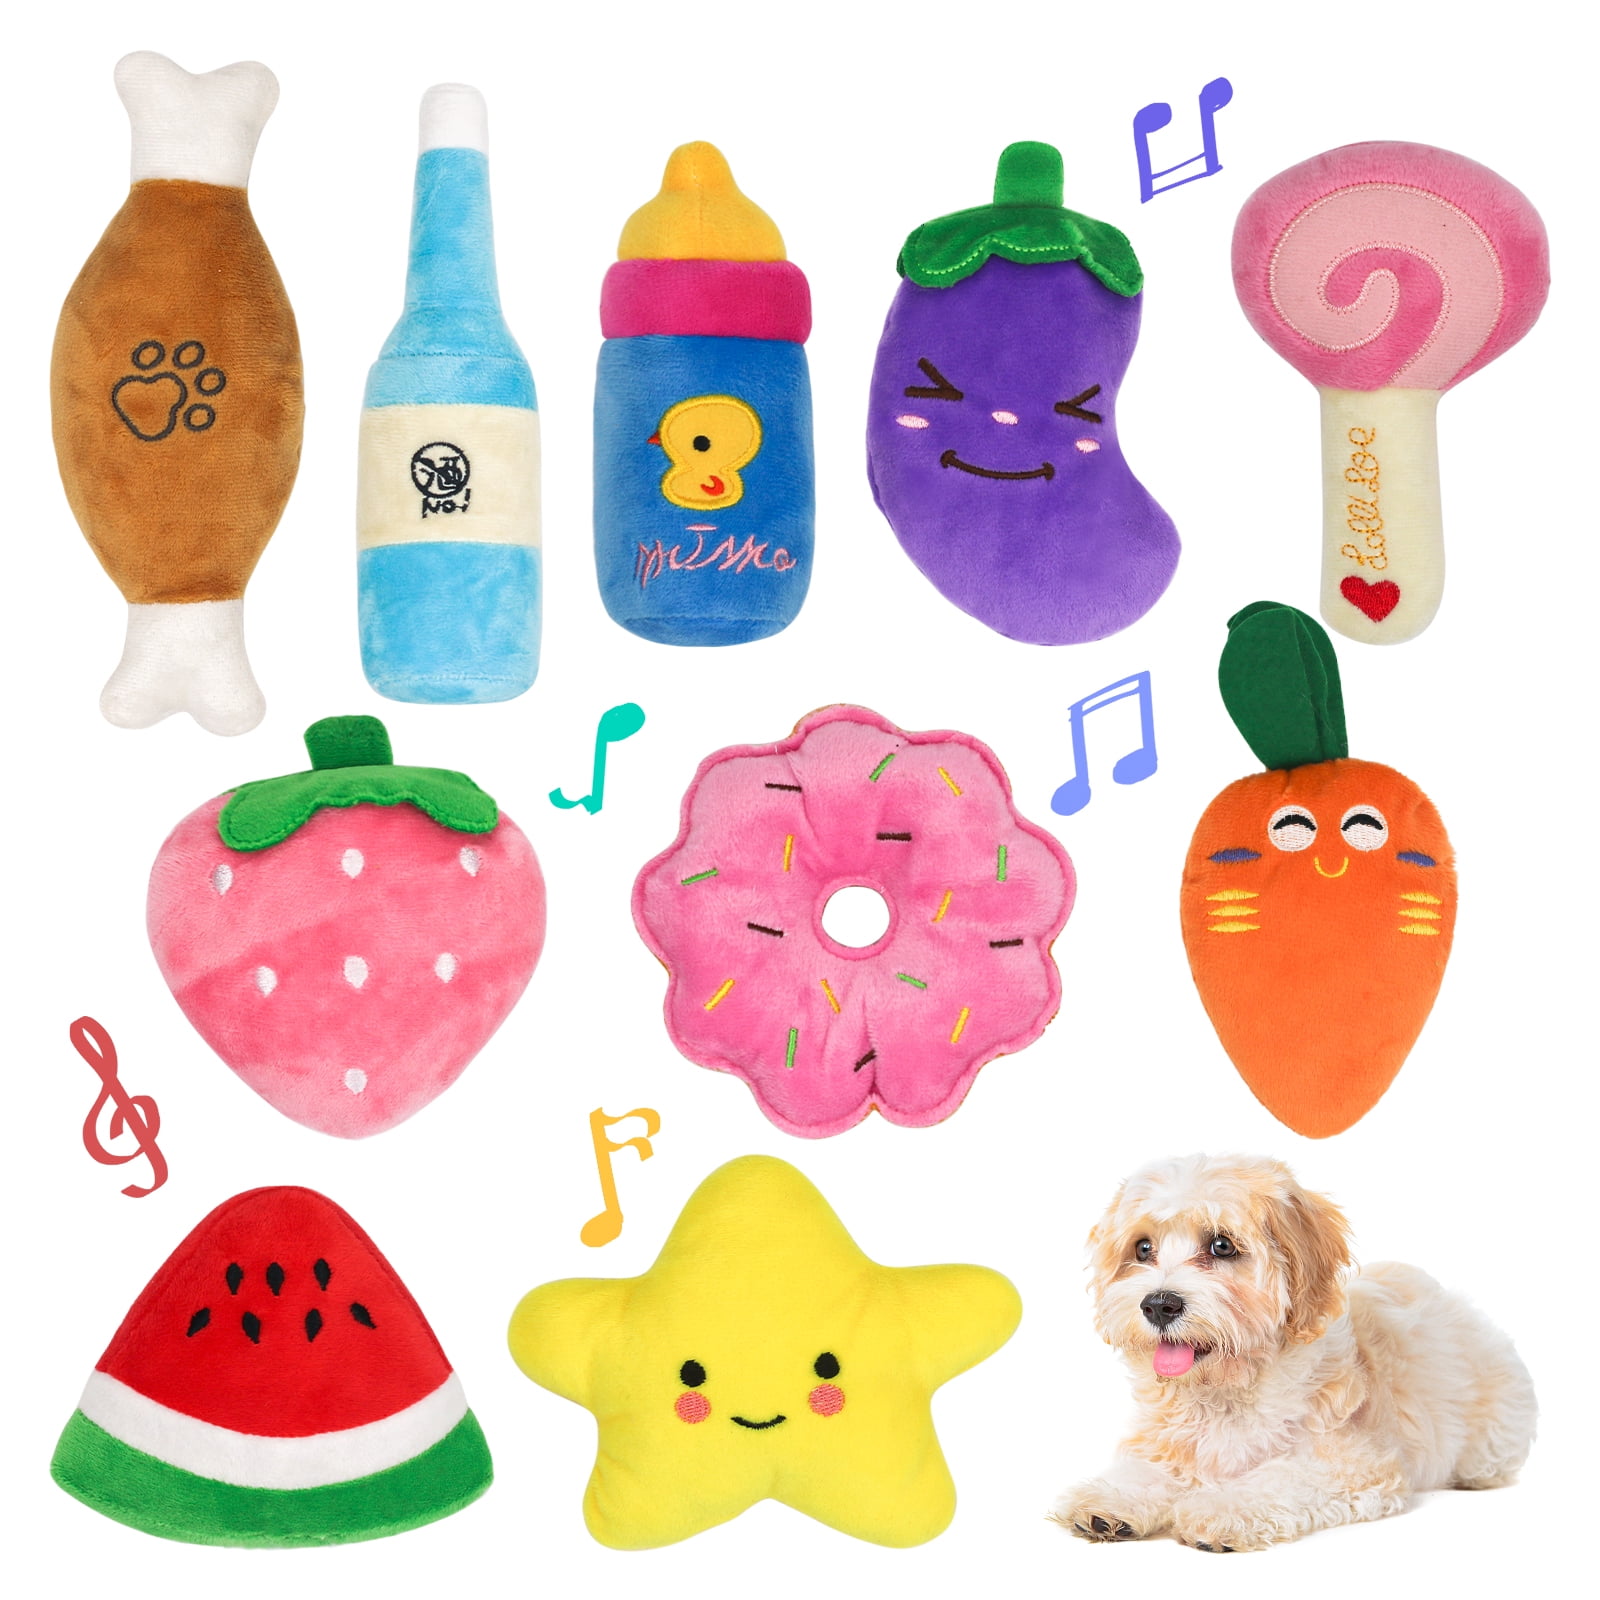 Shenmeida Dog Toy Squeaky Stuffed Dog Toys for Boredom %26 Stimulating  Play,Durable Pizza Shape Dog Stuffed Animals Chew Toy for Small Medium Dogs  